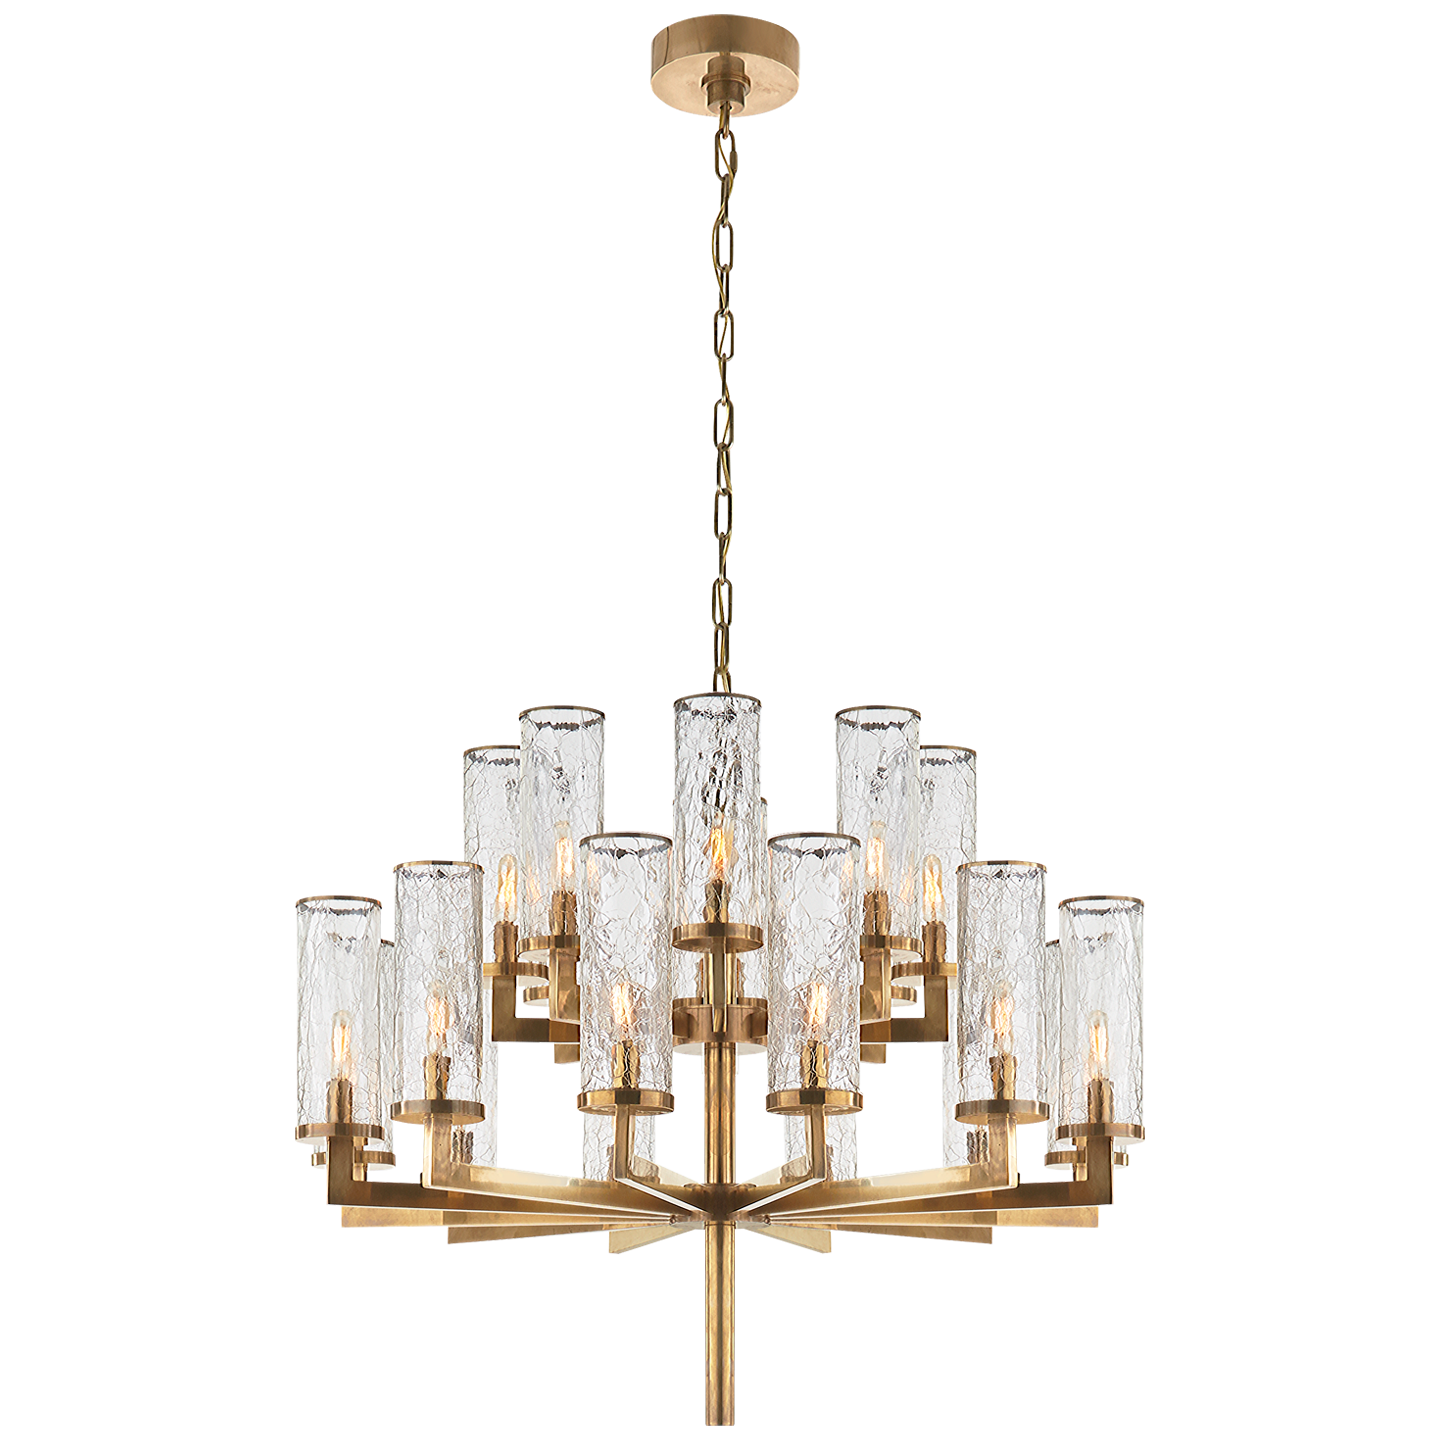 Double Liaison Chandelier - Brass and Cracked Glass 